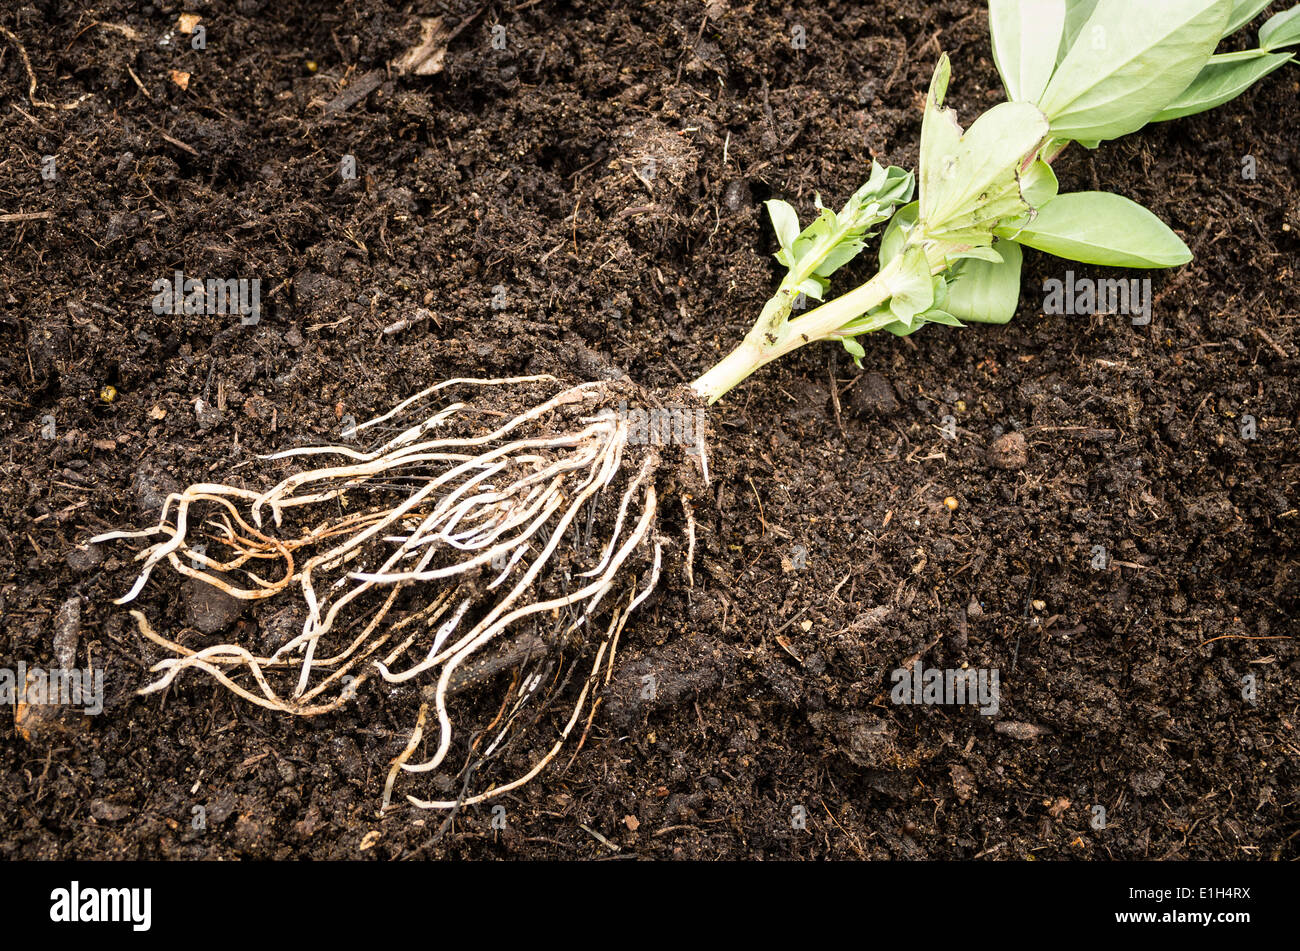 Young broad bean vegetable seedling ready for transplanting Stock Photo